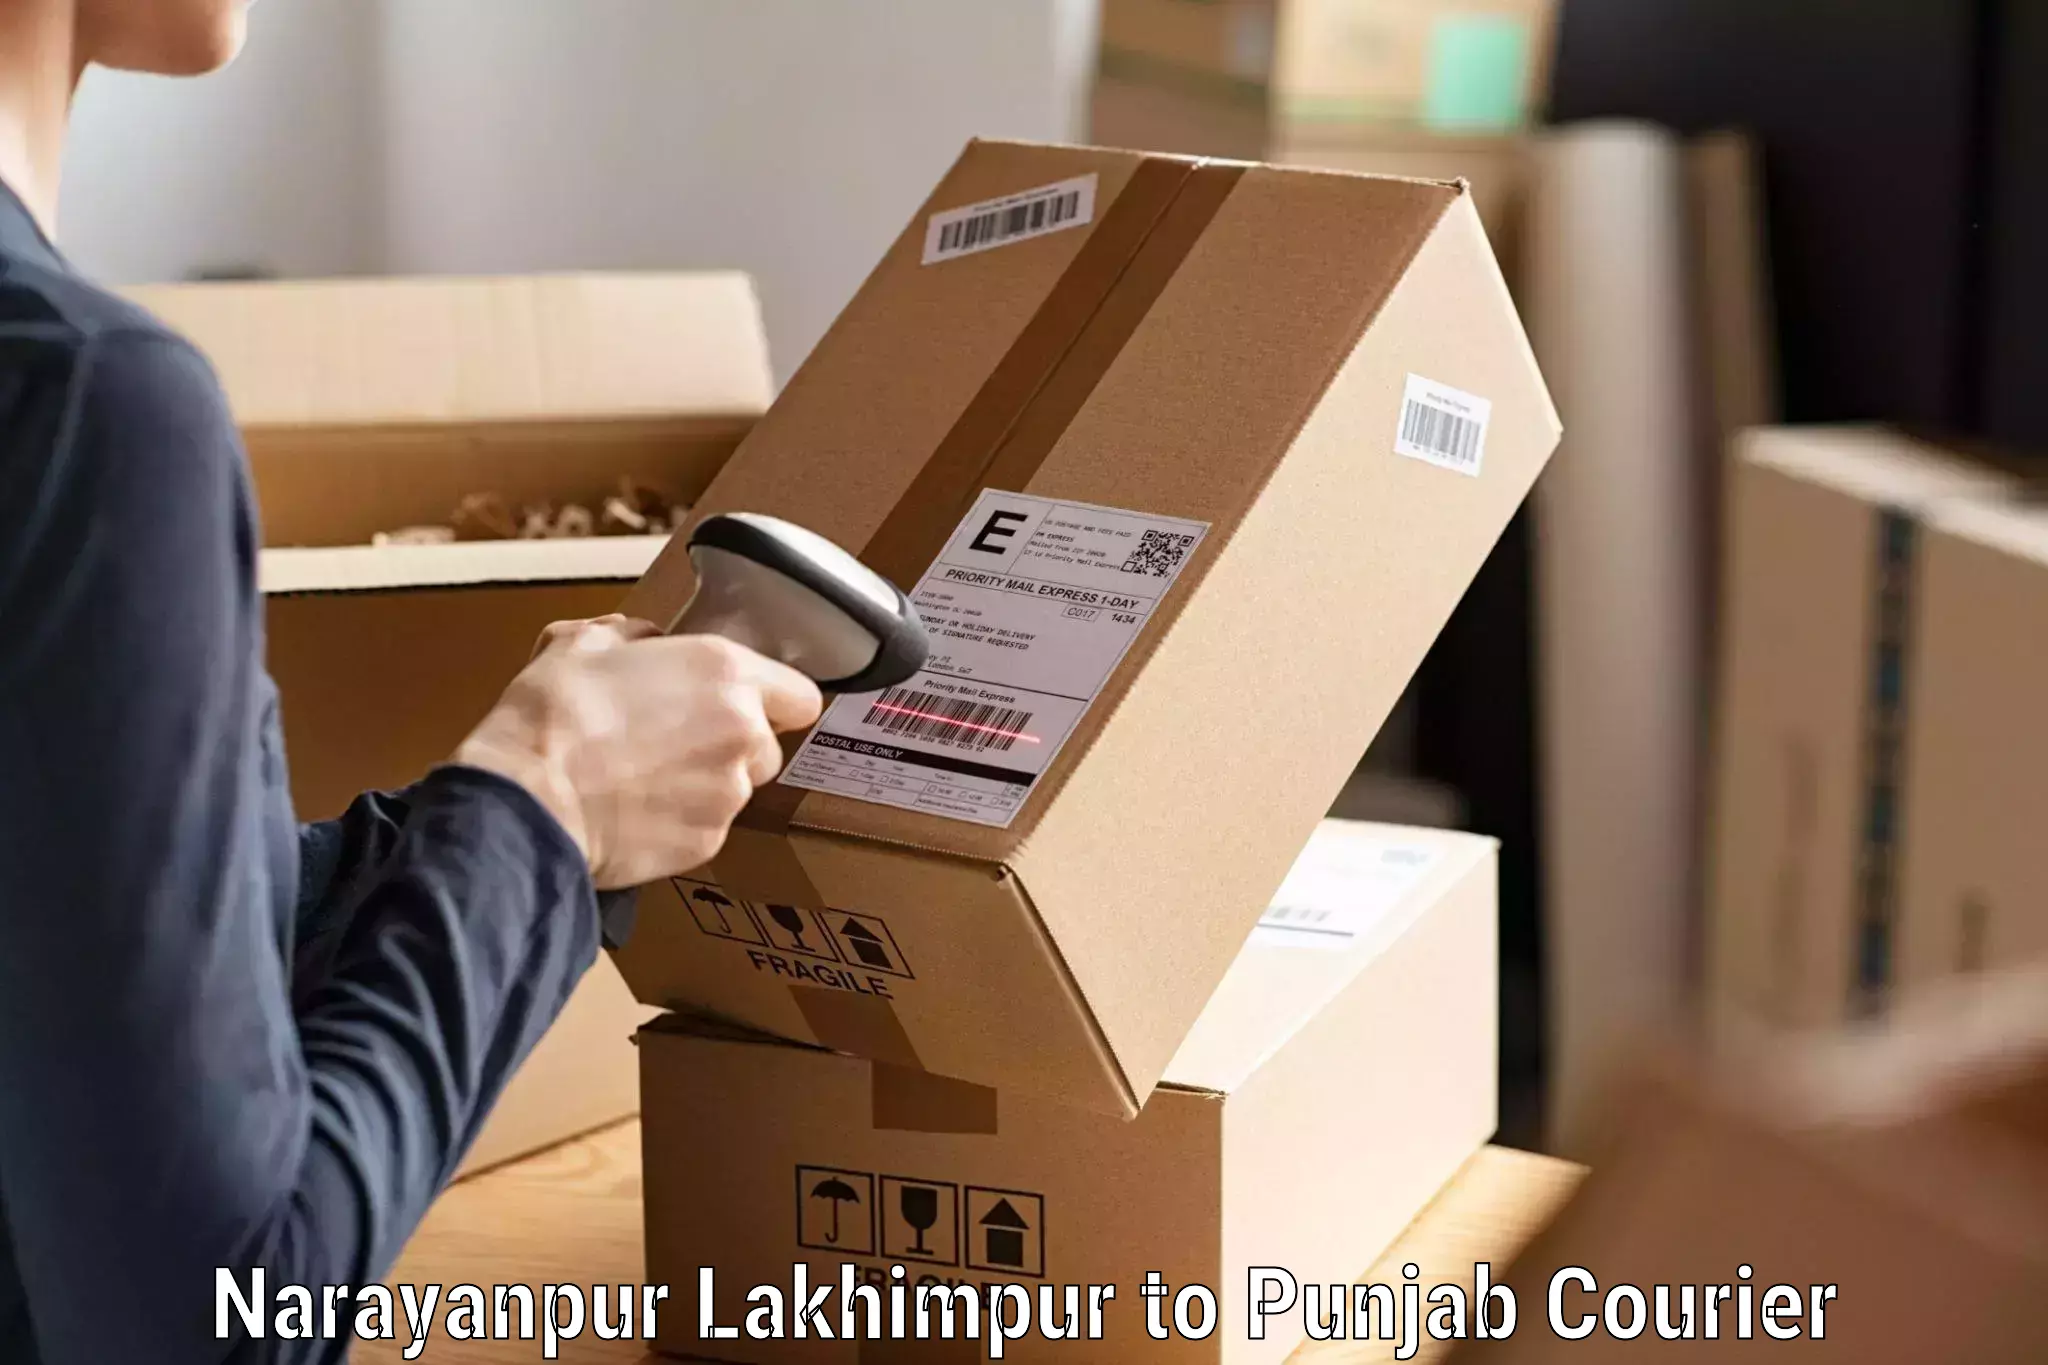 Express package delivery in Narayanpur Lakhimpur to Punjab